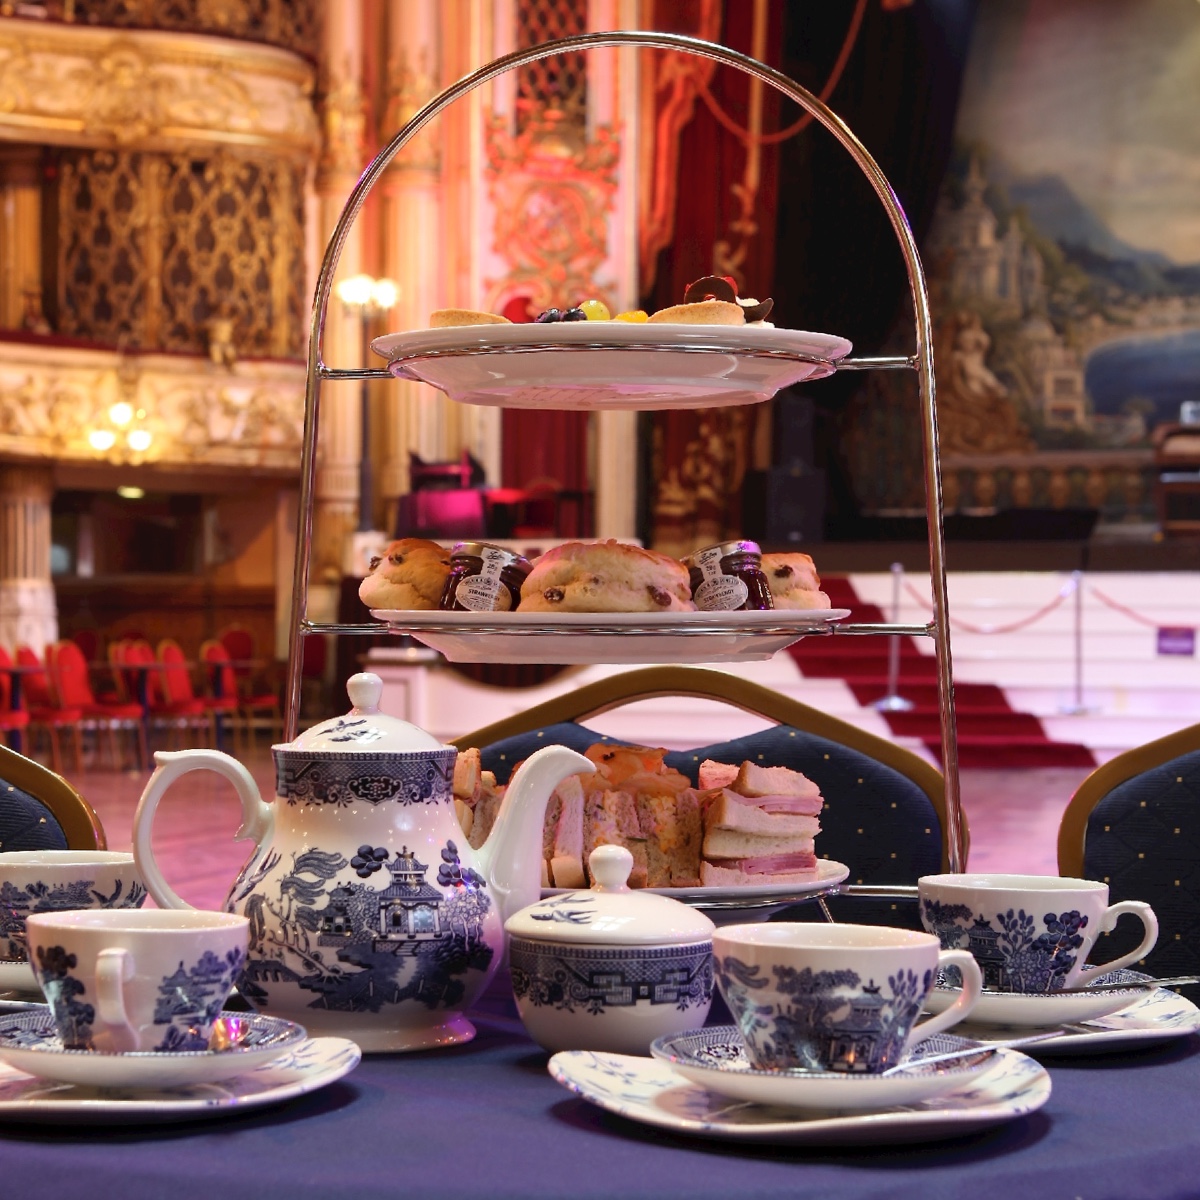 Afternoon tea, scones and cake at the Blackpool Tower Ballroom